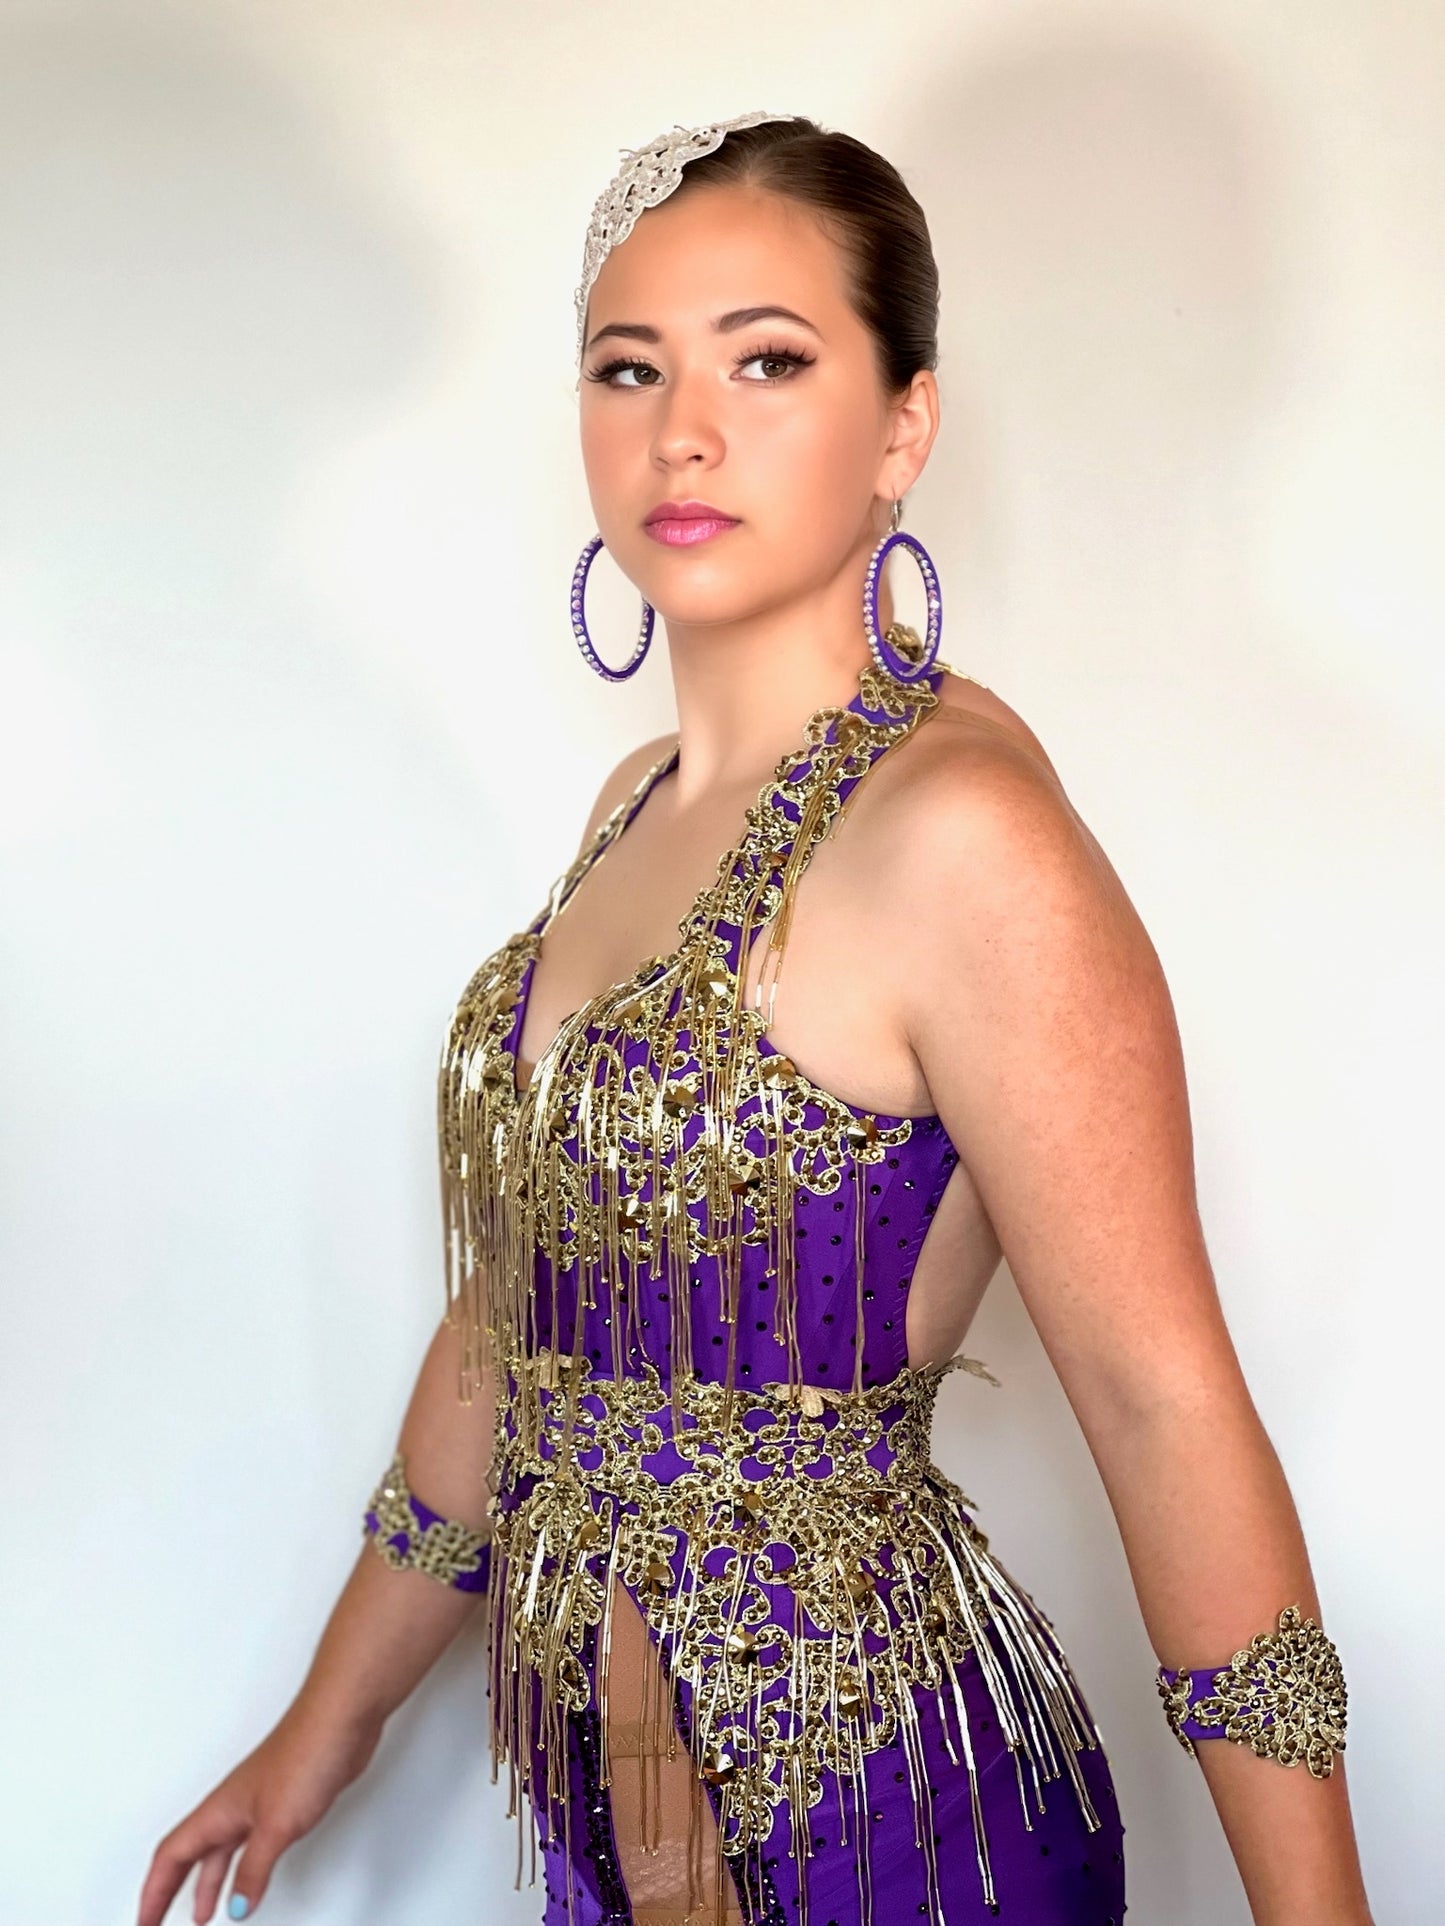 089 Purple & Gold heavily decorated Latin  Dress. Gold bead droppers, gold metallic appliqué & gold stones. Detachable belt with main dress stoned in purple velvet